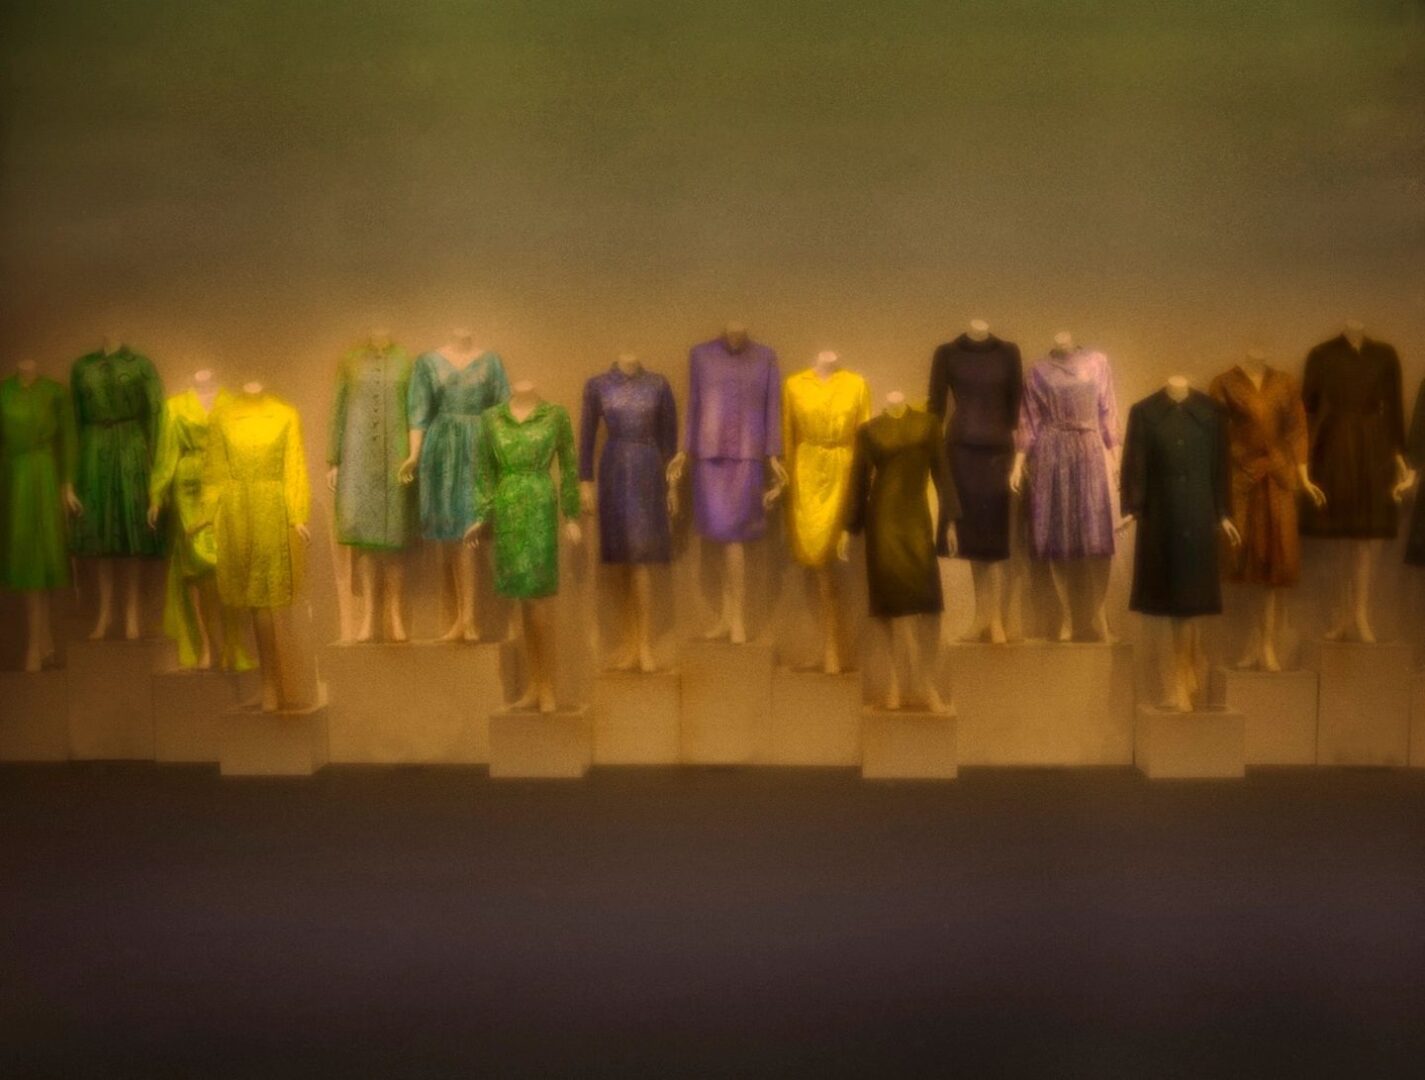 A row of dresses are lined up on the wall.